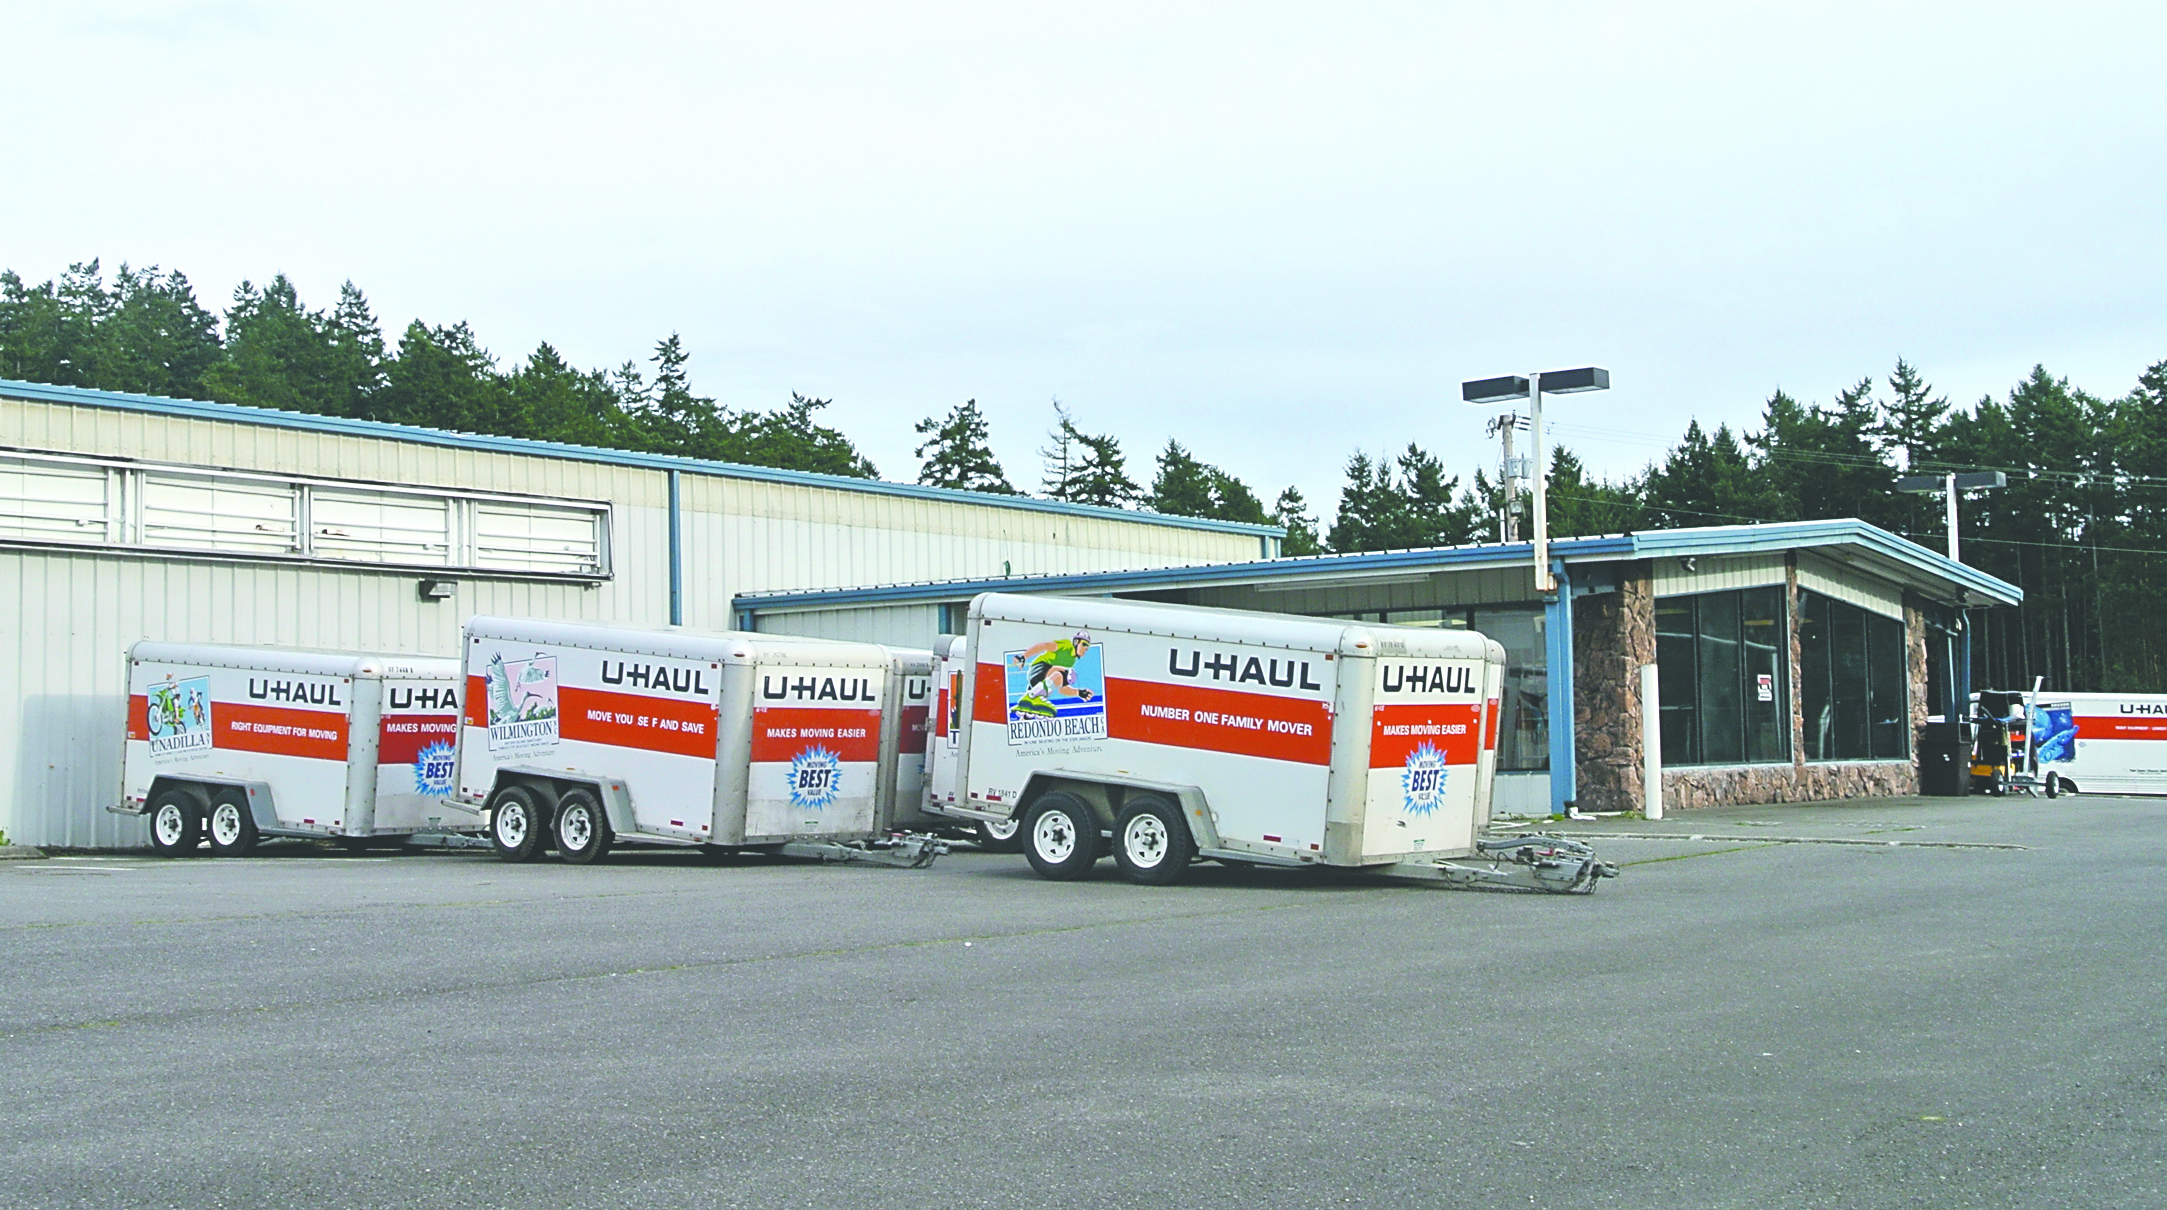 The new U-Haul facility south of Port Townsend is scheduled to open soon